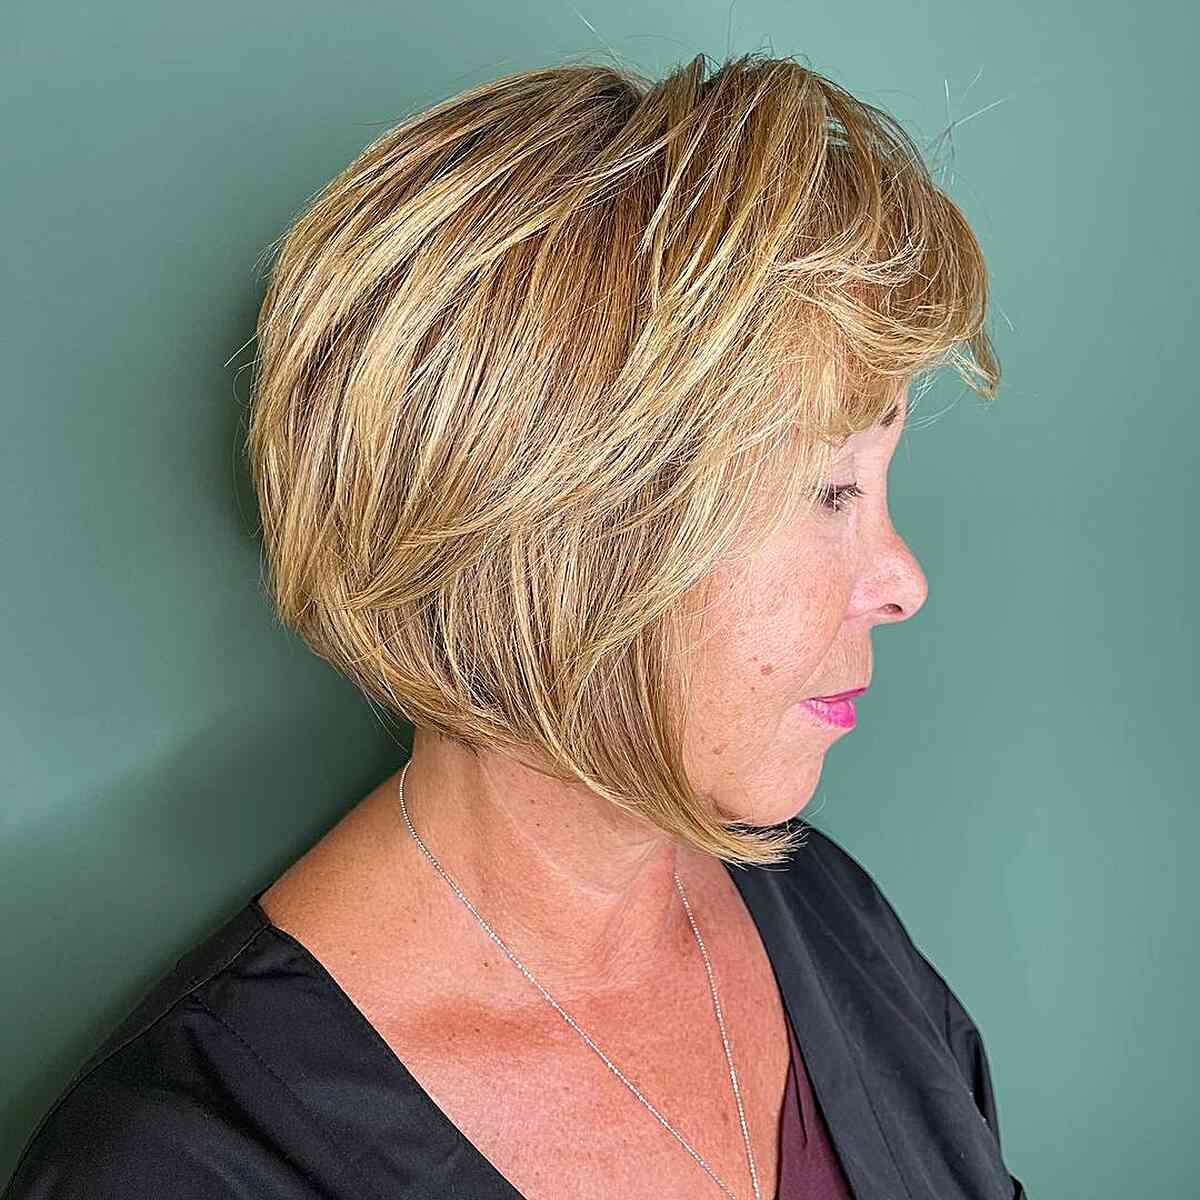 Chin-Length Bob Cut with Angled Layers and Bangs on women past their 60s